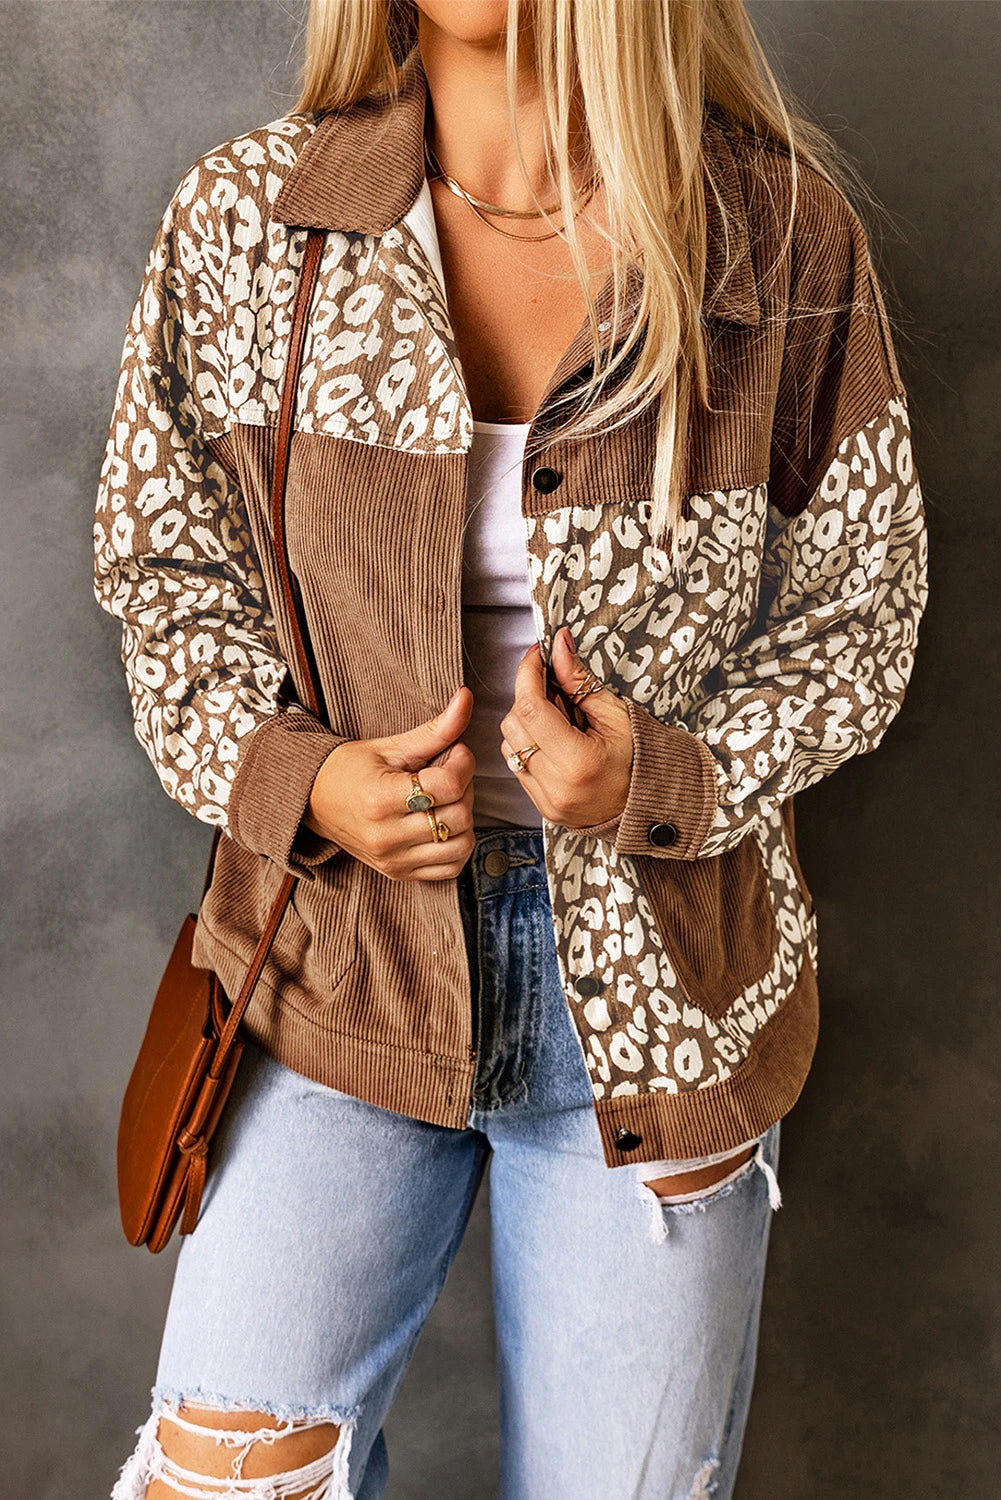 Brown and Leopard Corduroy Jacket